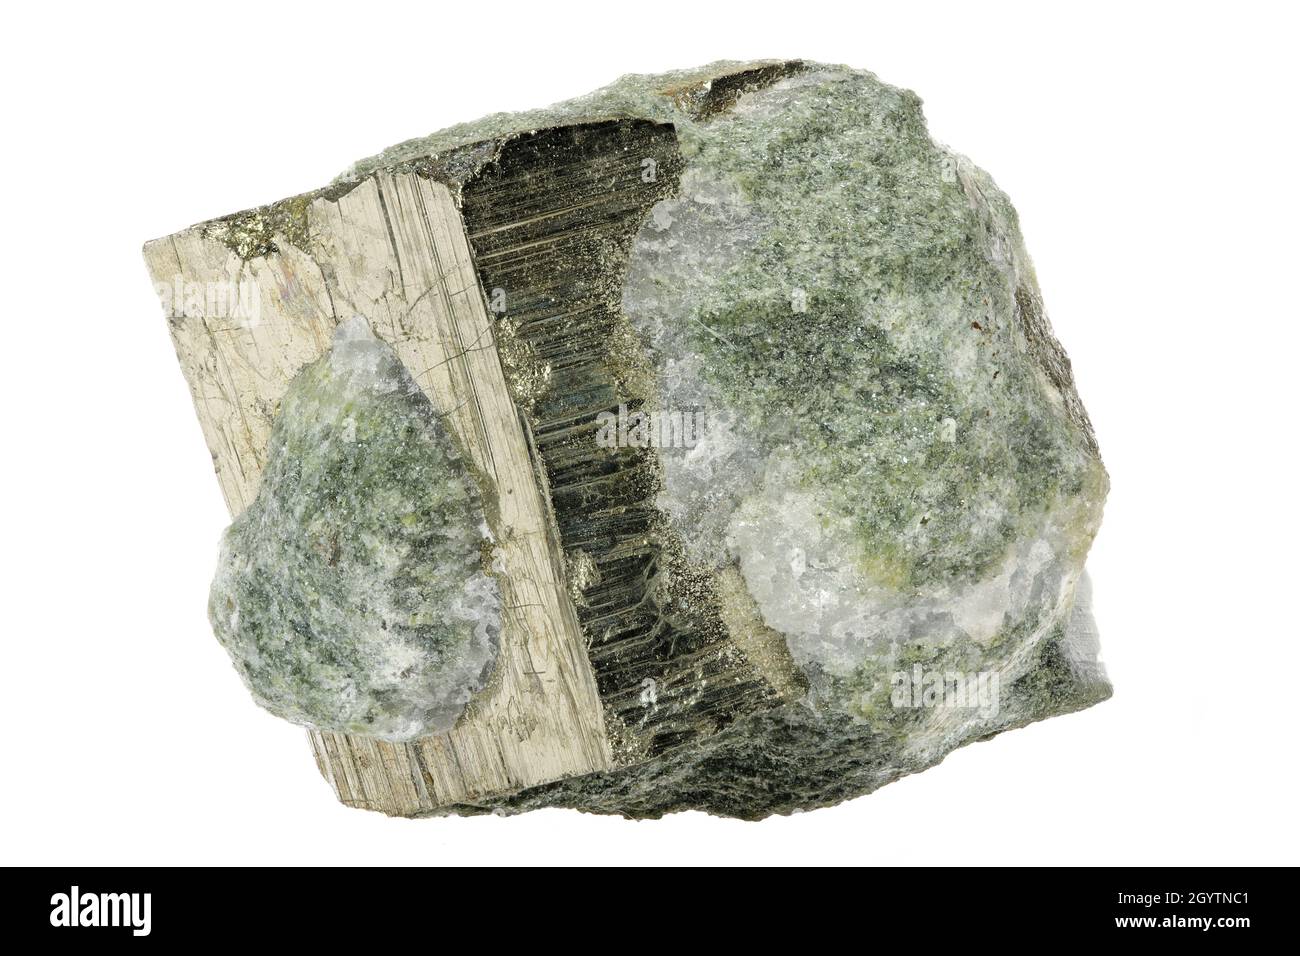 pyrite cubic crystal from Rechnitz, Austria isolated on white background Stock Photo